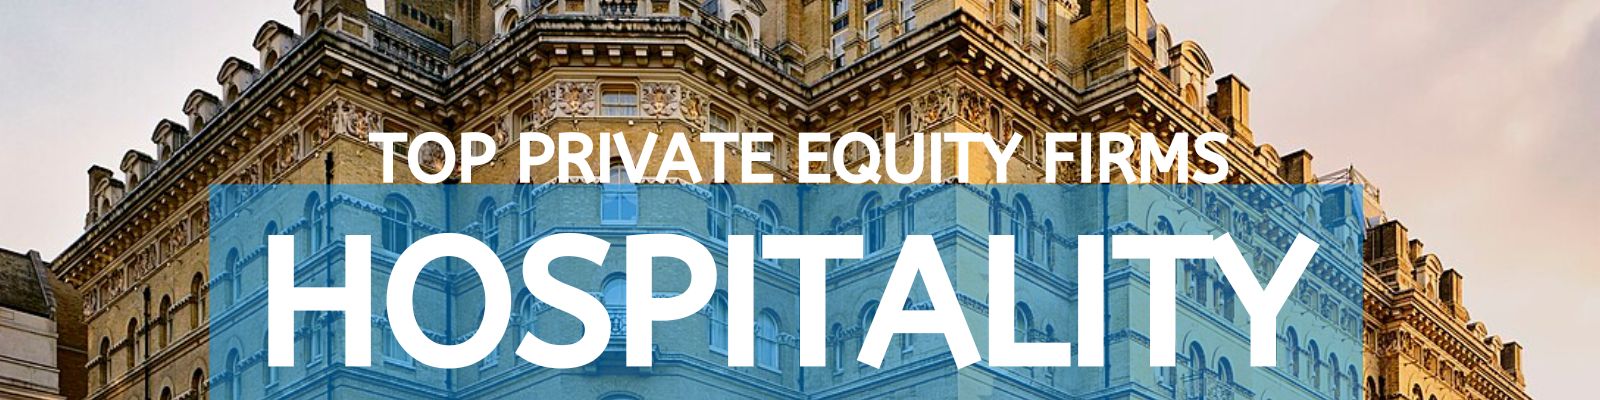 Top Private Equity Firms Hospitality